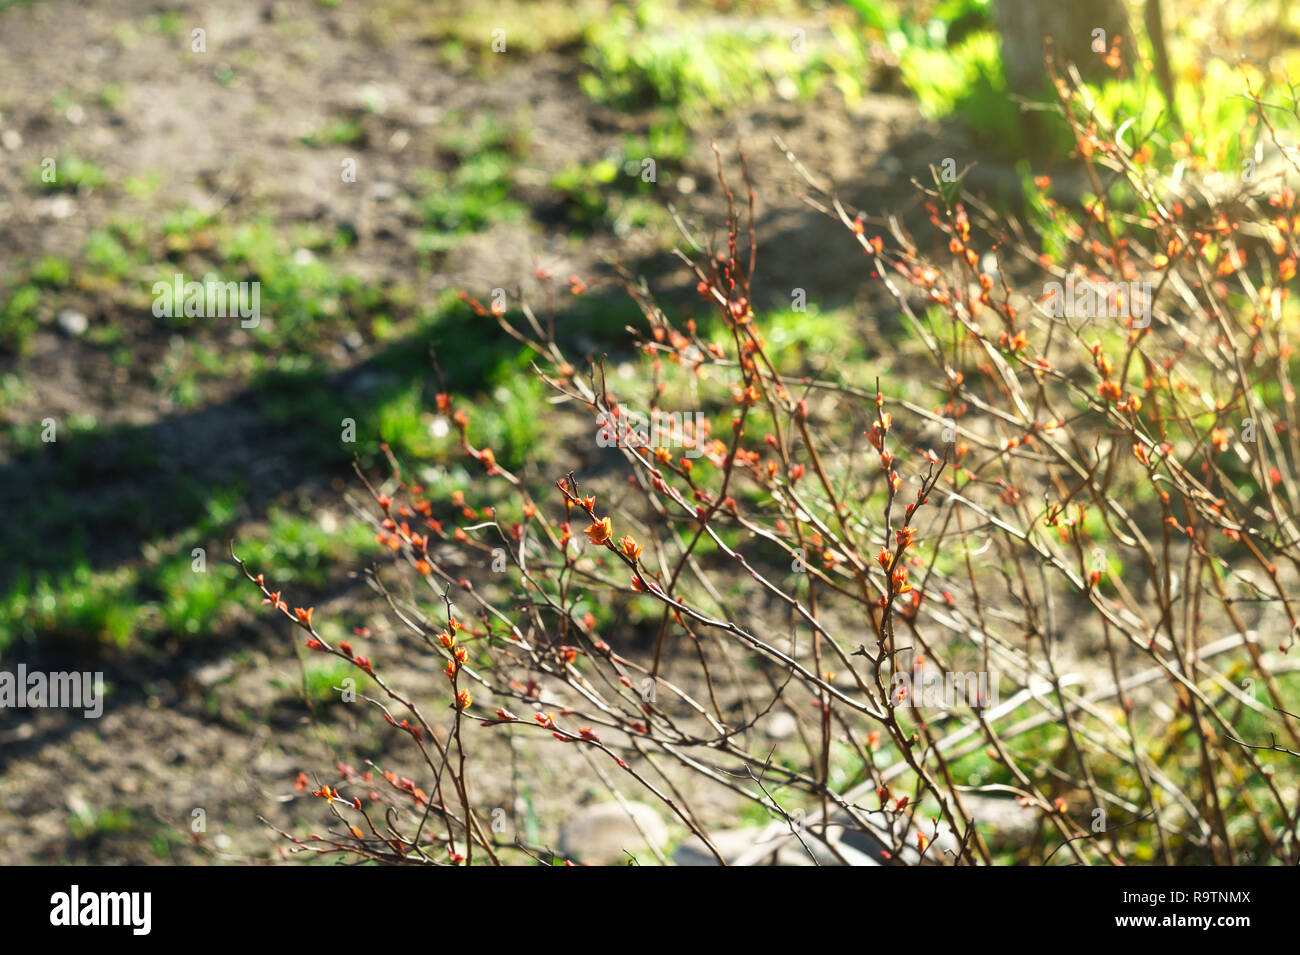 Young Spring Leaves On A Japanese Spirea Bush Stock Photo Alamy